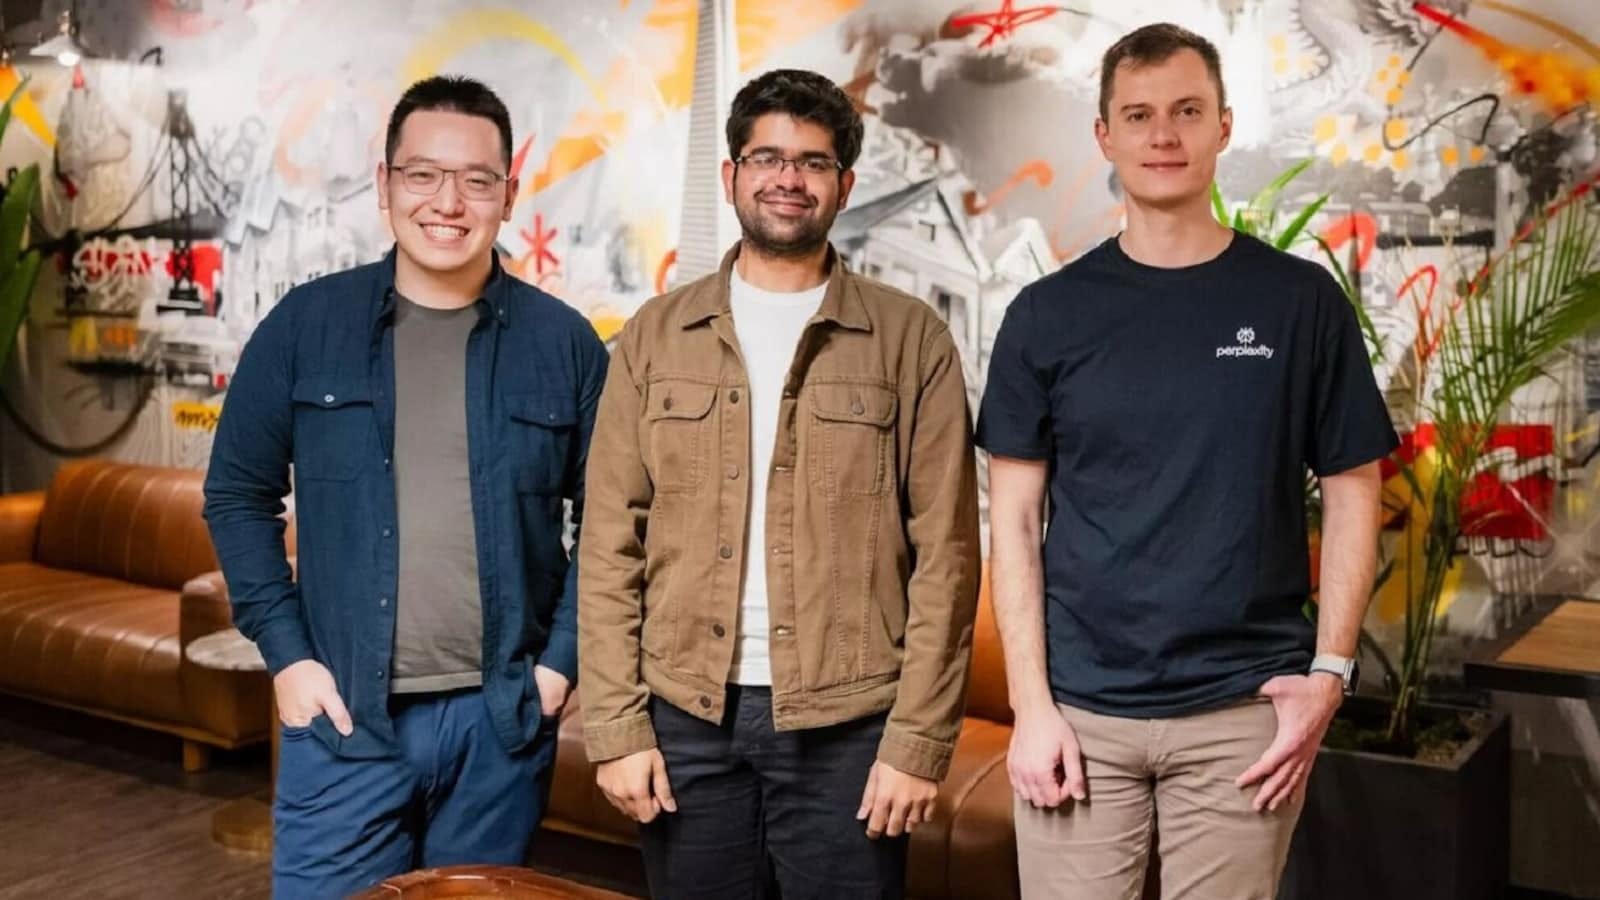 AI search startup Perplexity valued at $1 billion in funding round